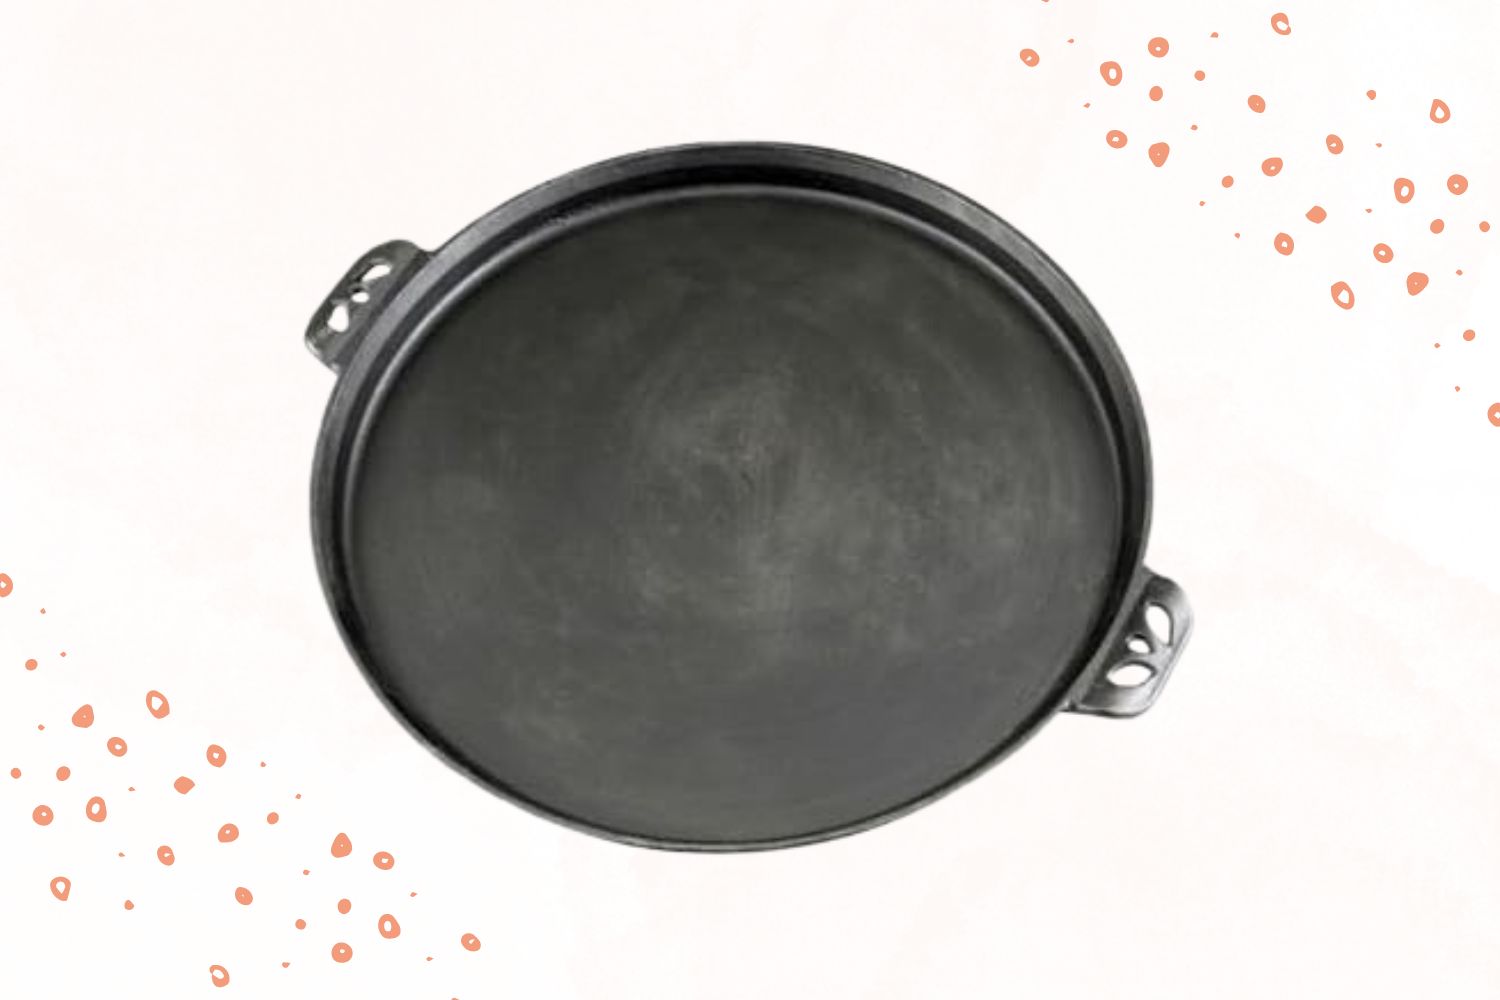 Camp Chef Cast Iron Pizza Pan